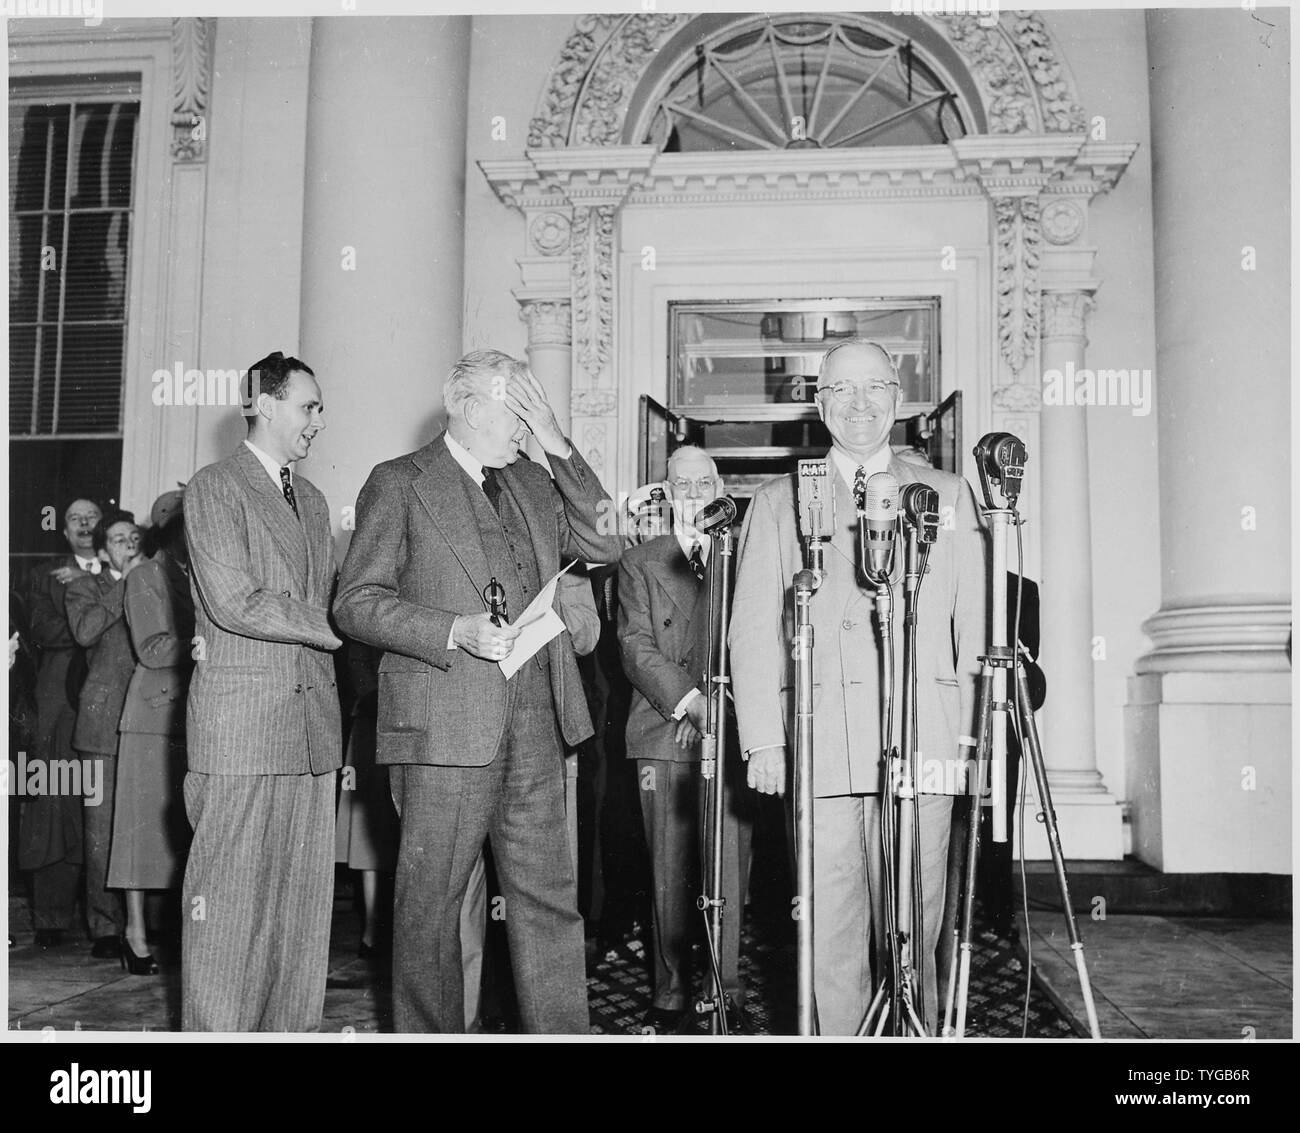 President Harry S. Truman, Vice President-elect Alben W. Barkley, and others standing on the front porch of the White House; President Truman is standing before several microphones. Truman and Barkley had just returned to Washington, DC after their victory in the election of 1948. Stock Photo